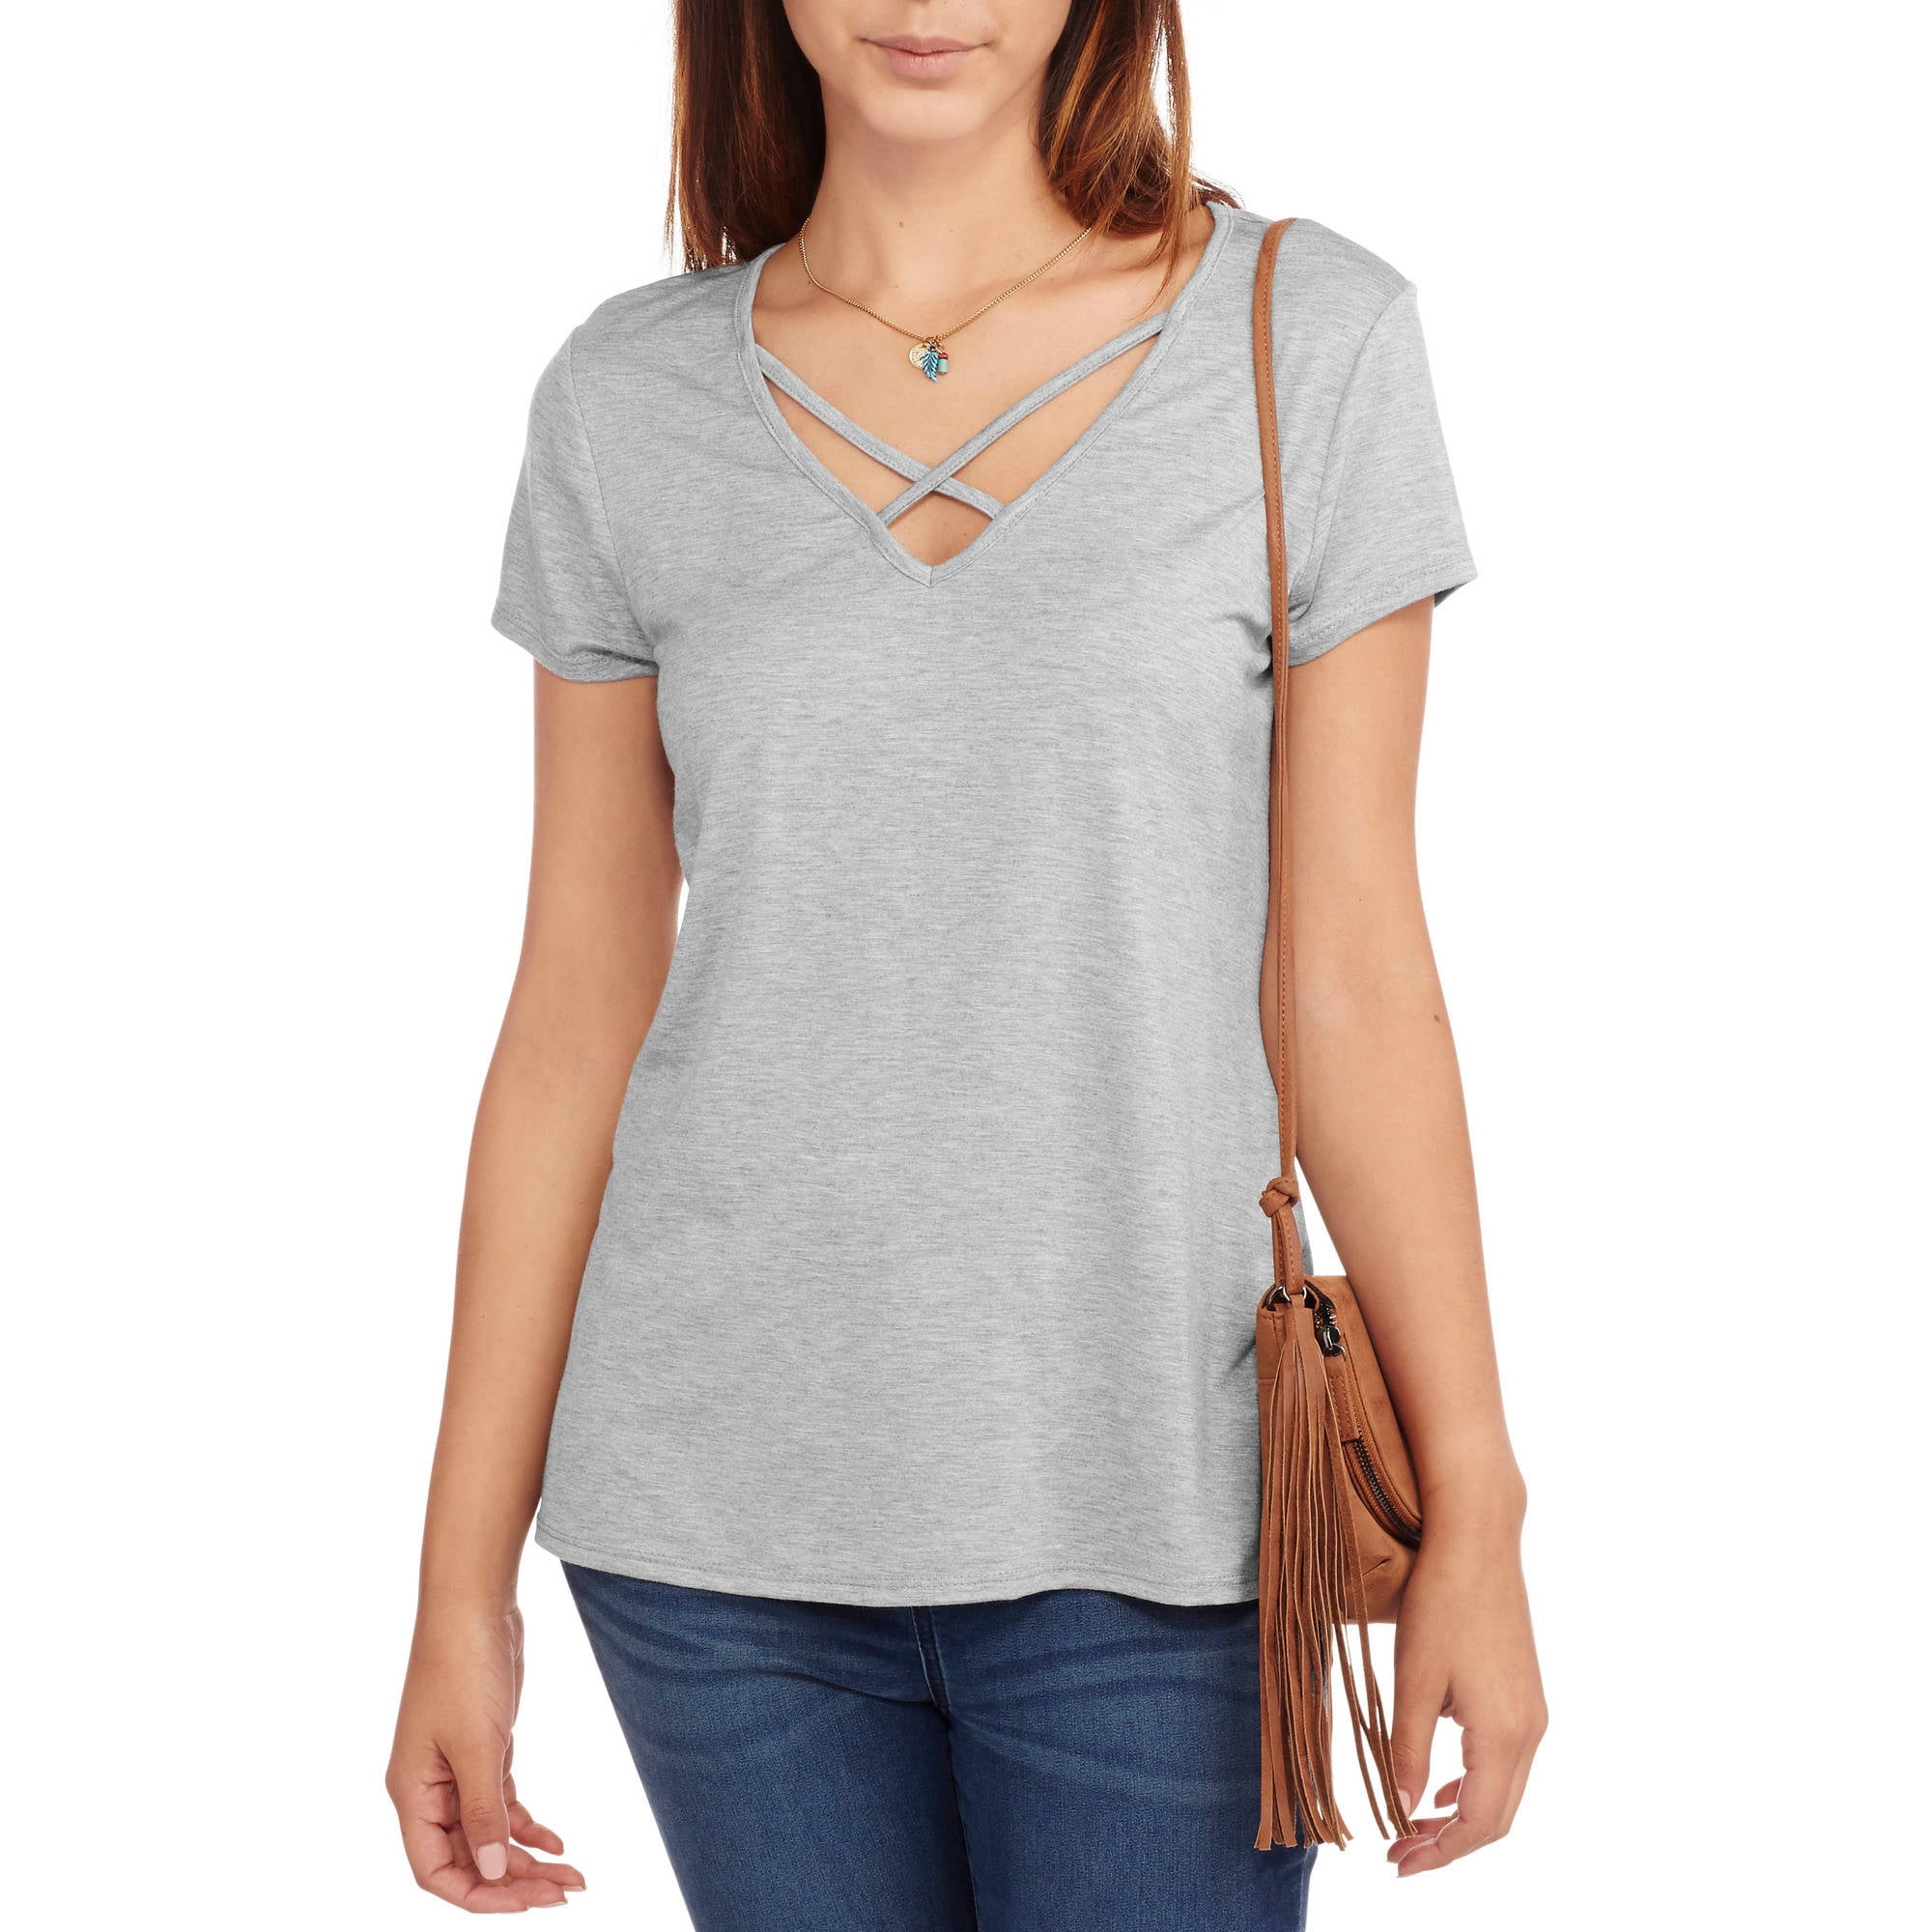 Womens Ladies Solid Sleevless V-Neck Front Criss Cross Shirt Pullover Tops